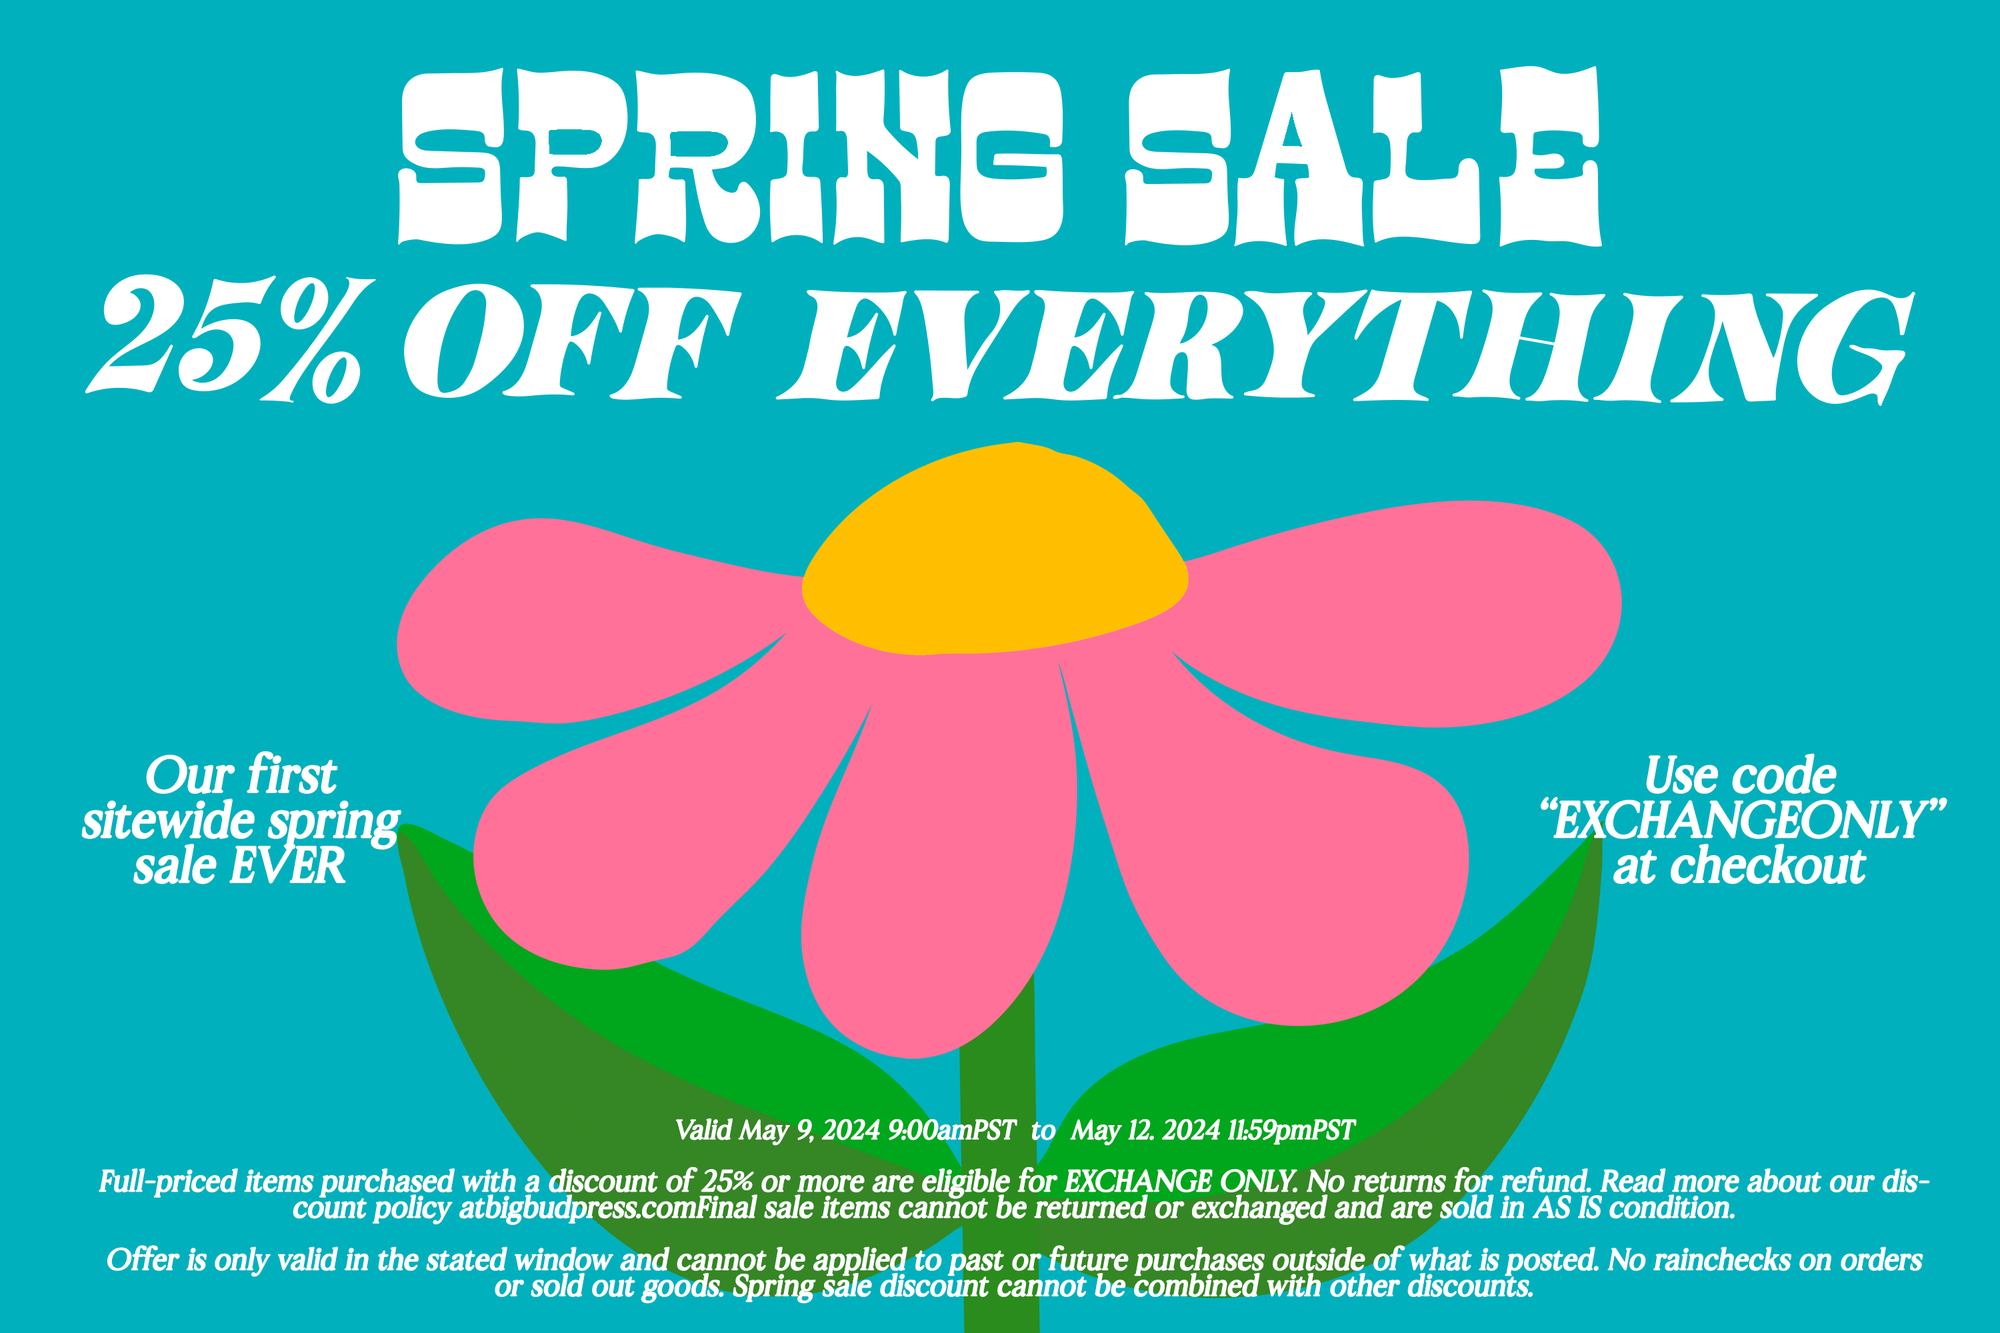 SPRING SALE - 25% OFF ENTIRE SITE